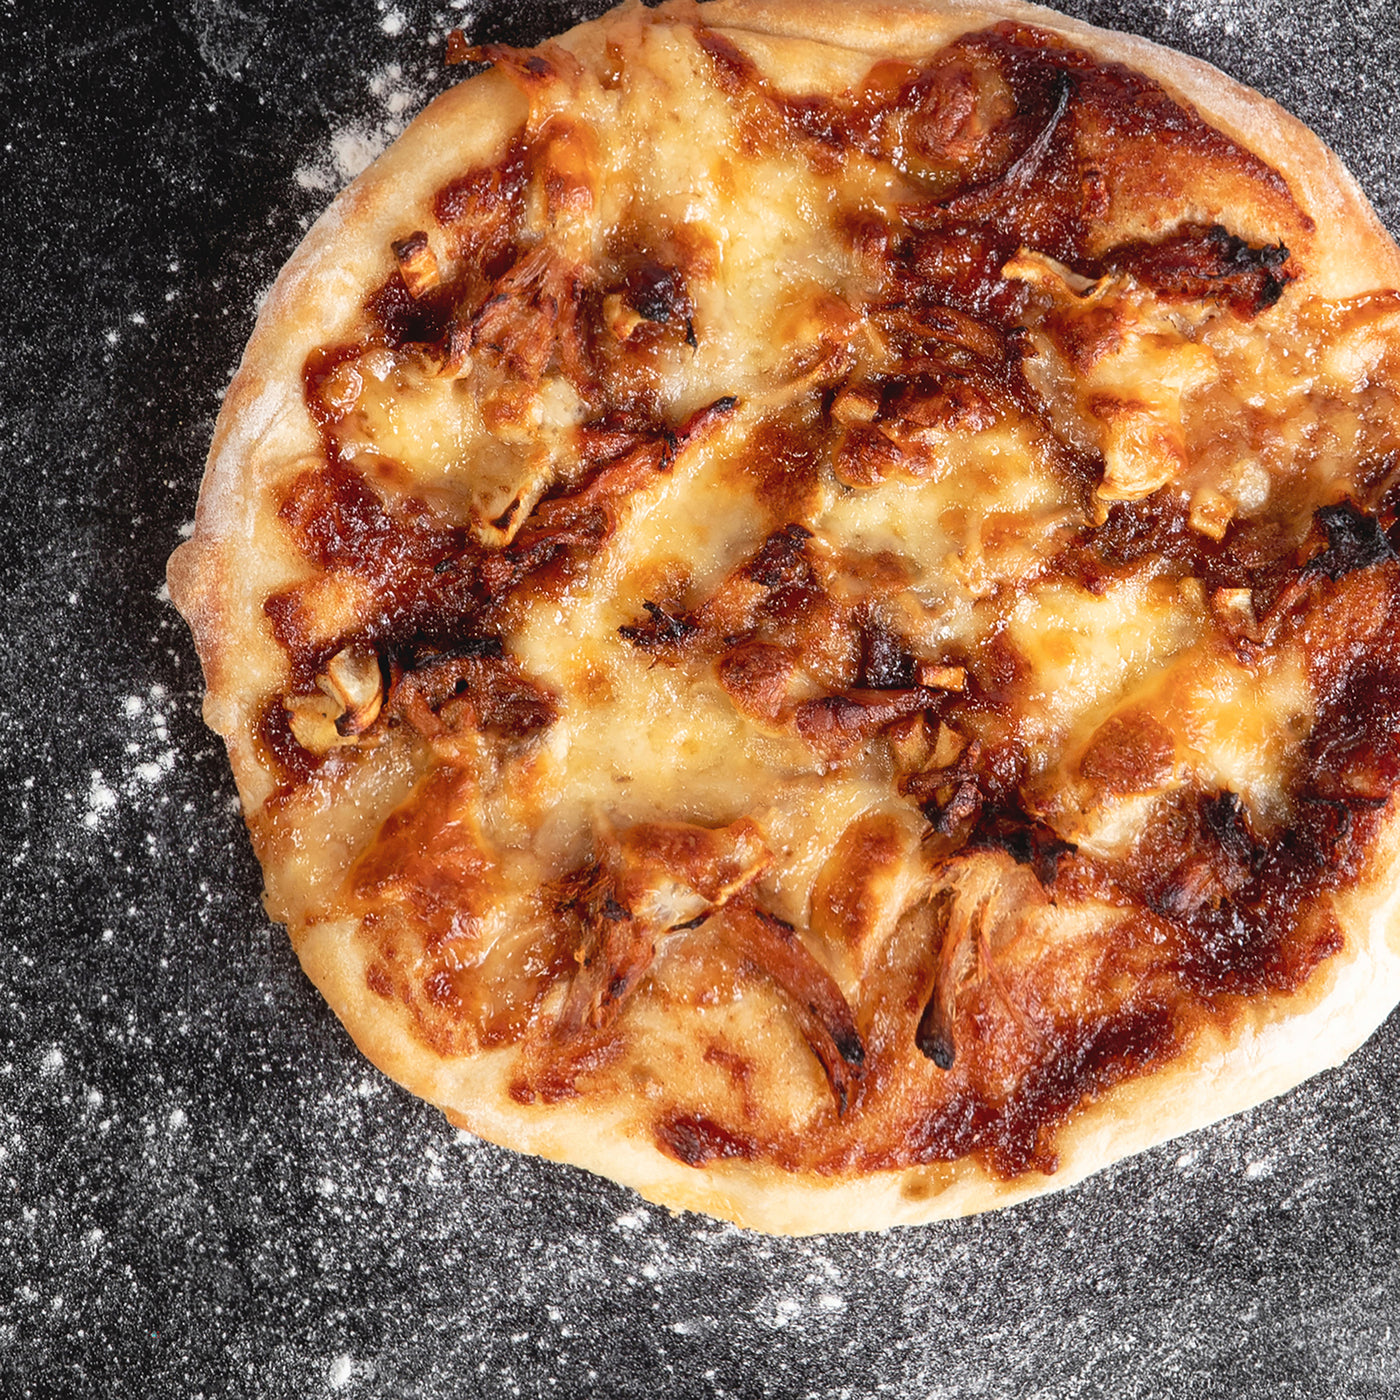 Apple Maple Pizza with Pulled Pork & Parsnips